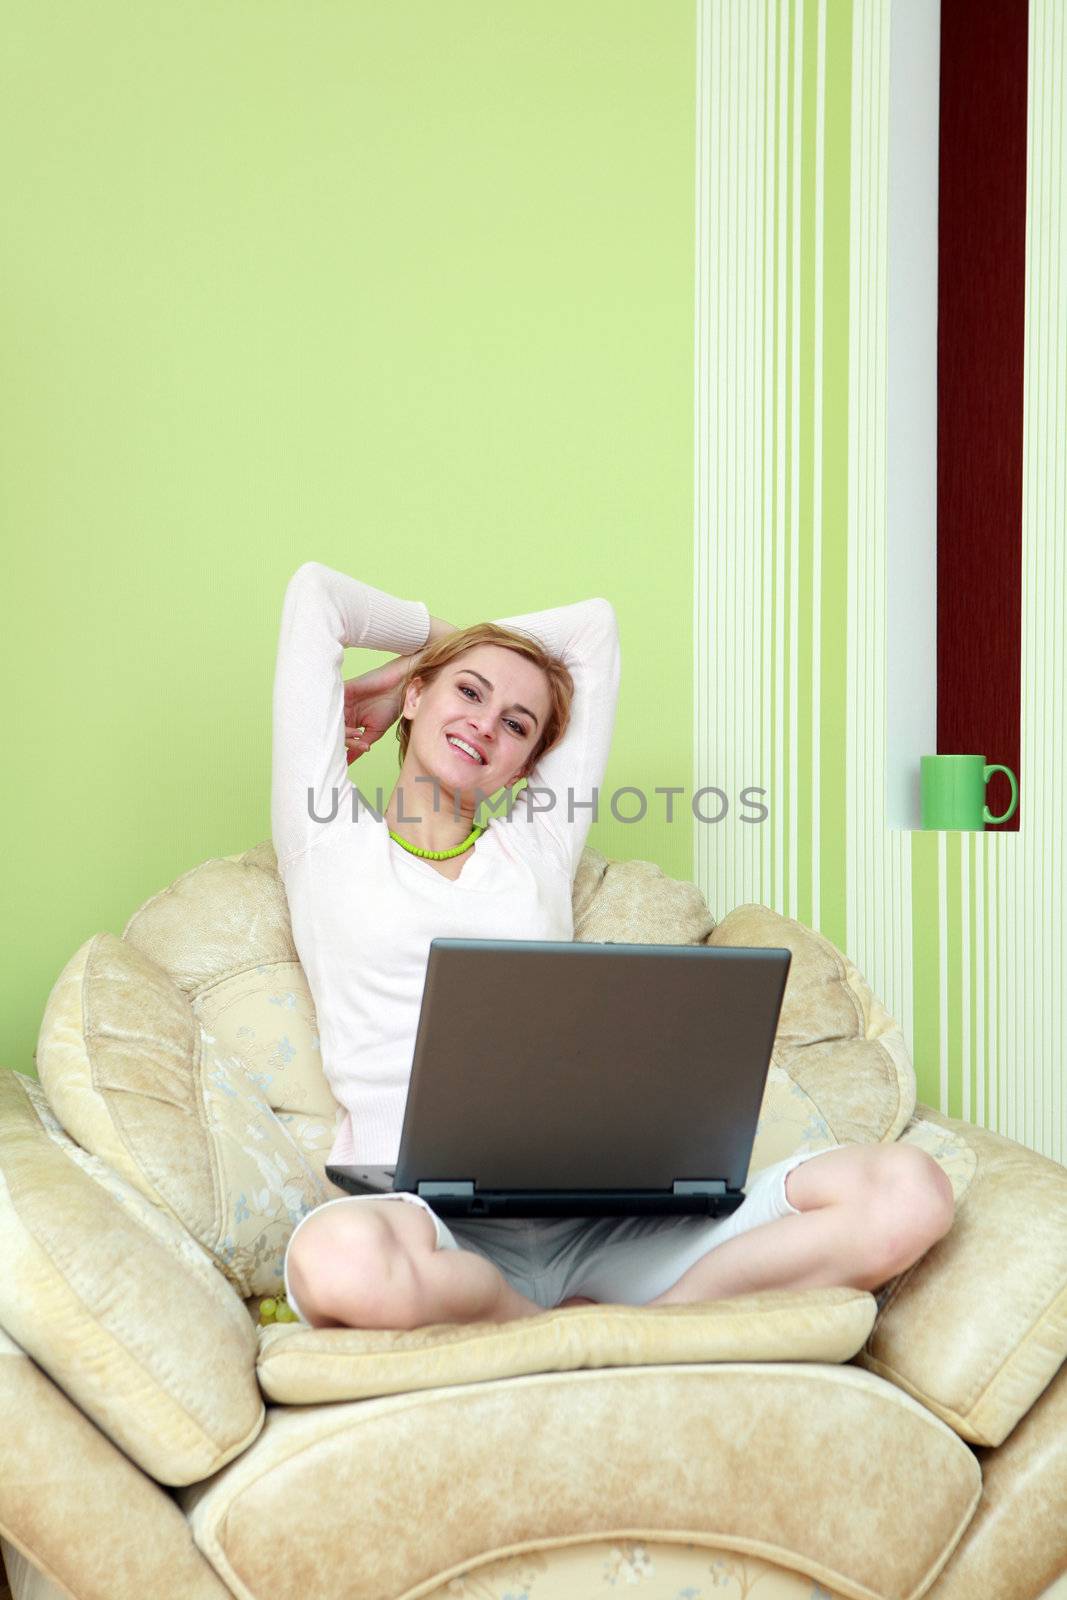 An image of a girl with a laptop at home